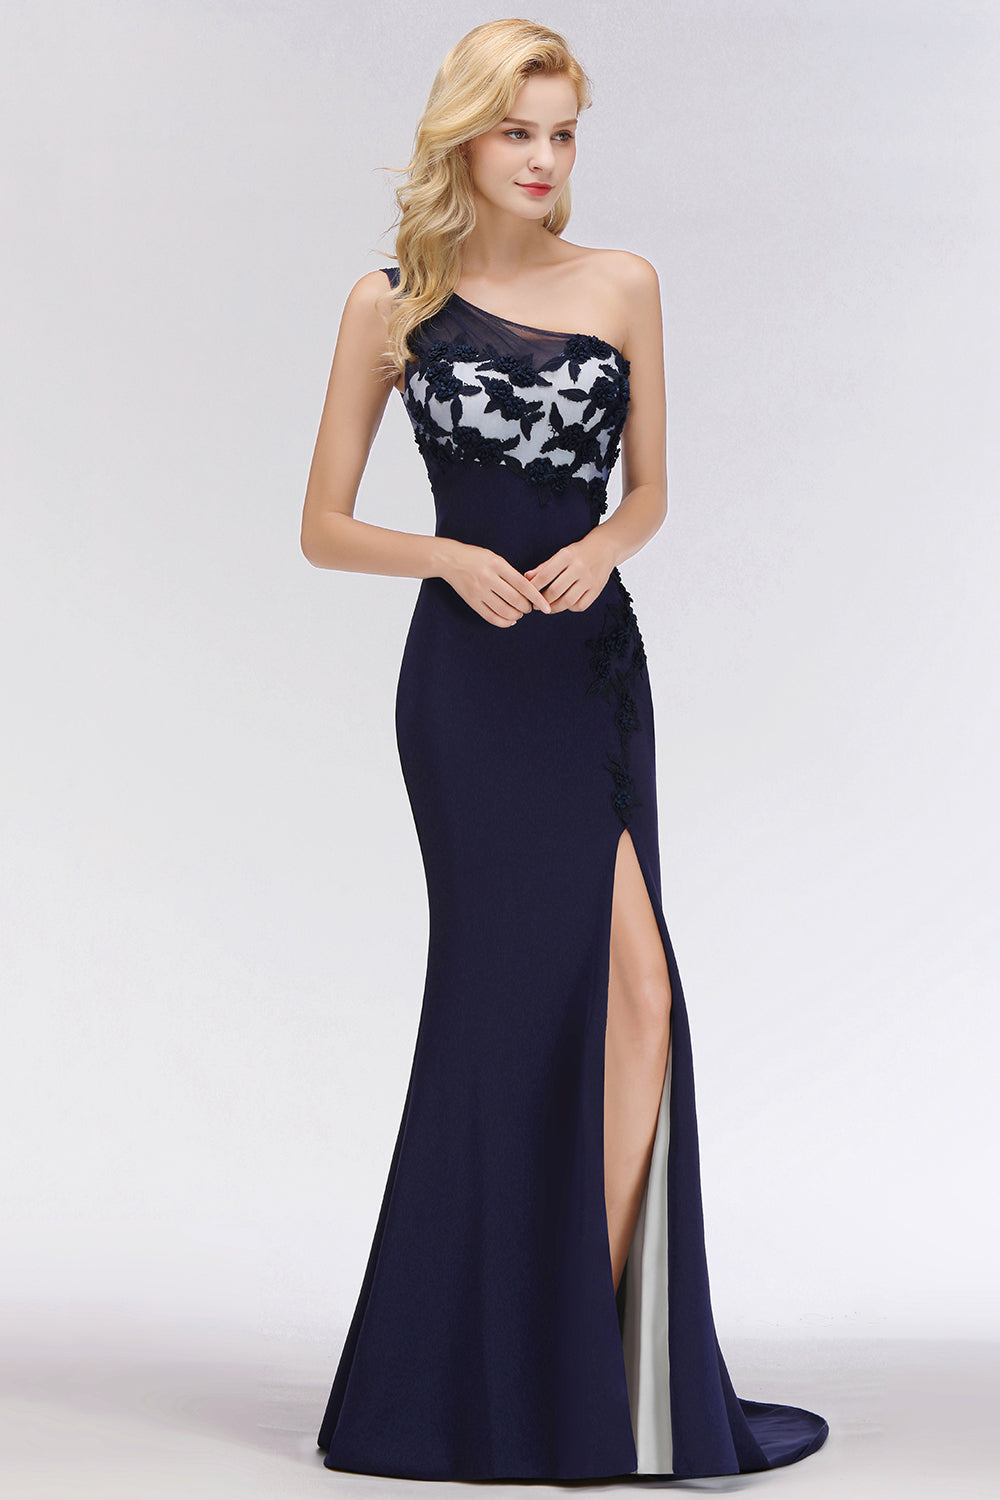 Simple Long One Shoulder Mermaid Bridesmaid Dress with Slit-BIZTUNNEL